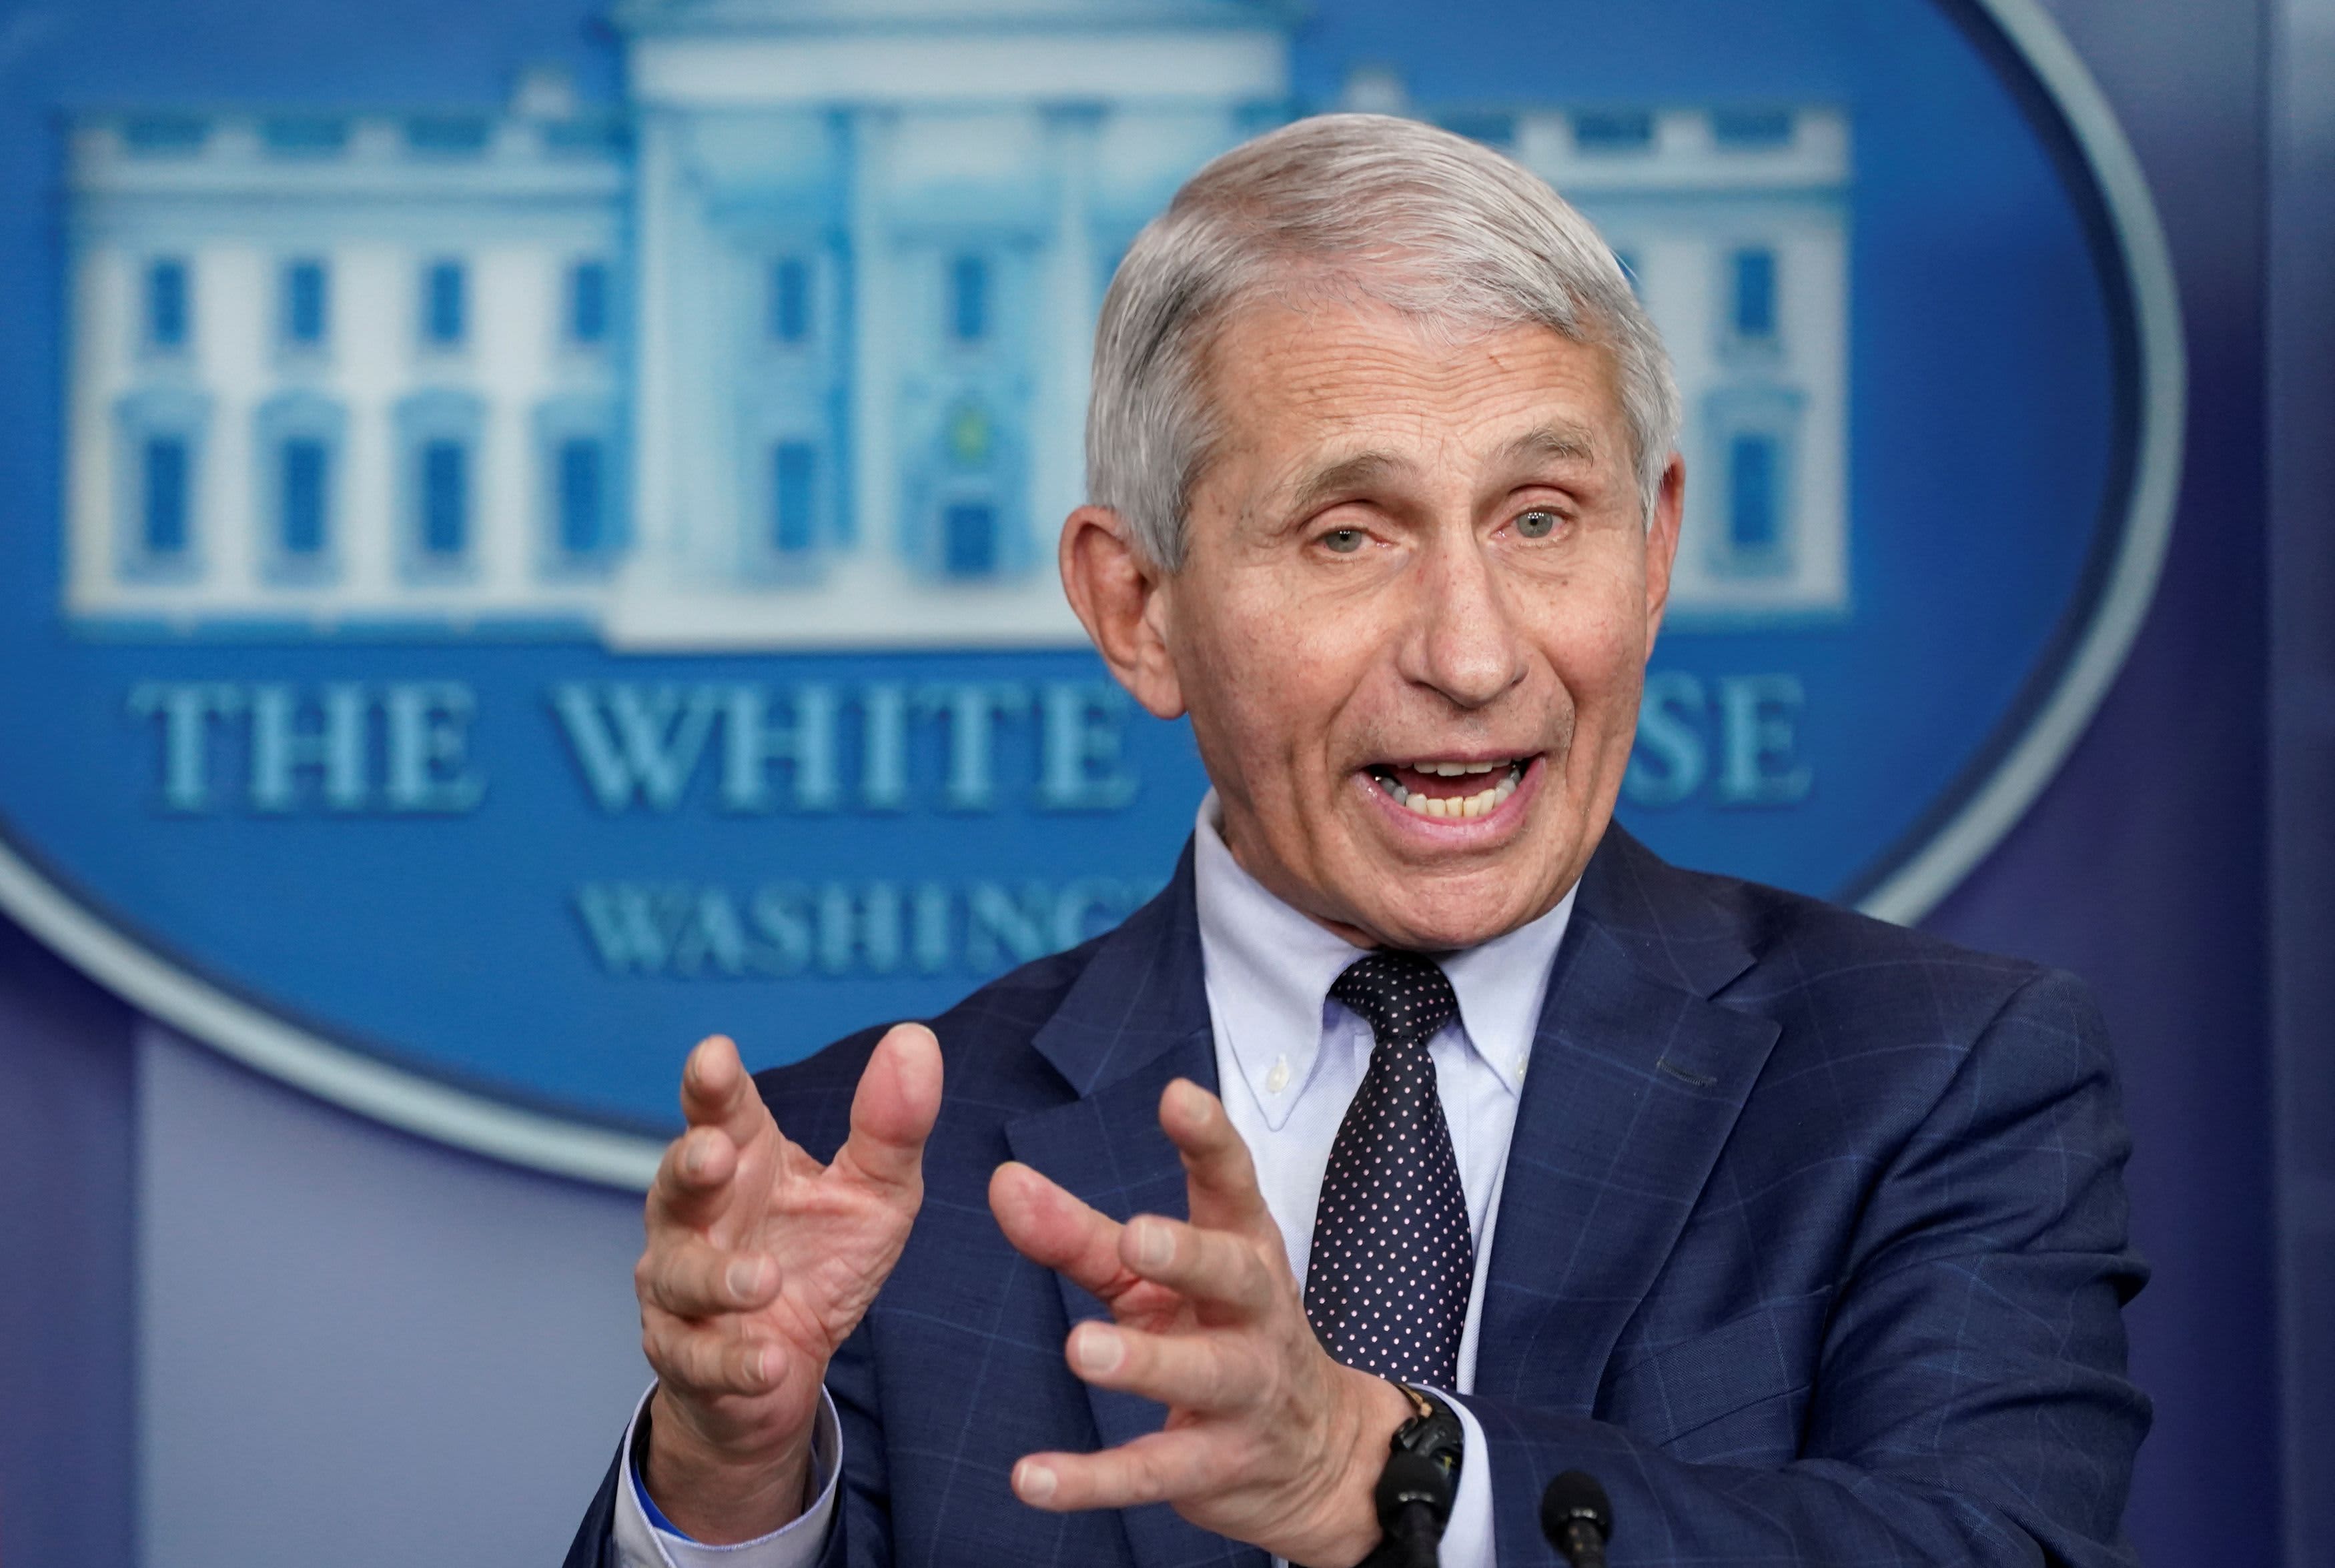 Fauci says booster shots likely give cross protection against 'wide range' of Covid variants